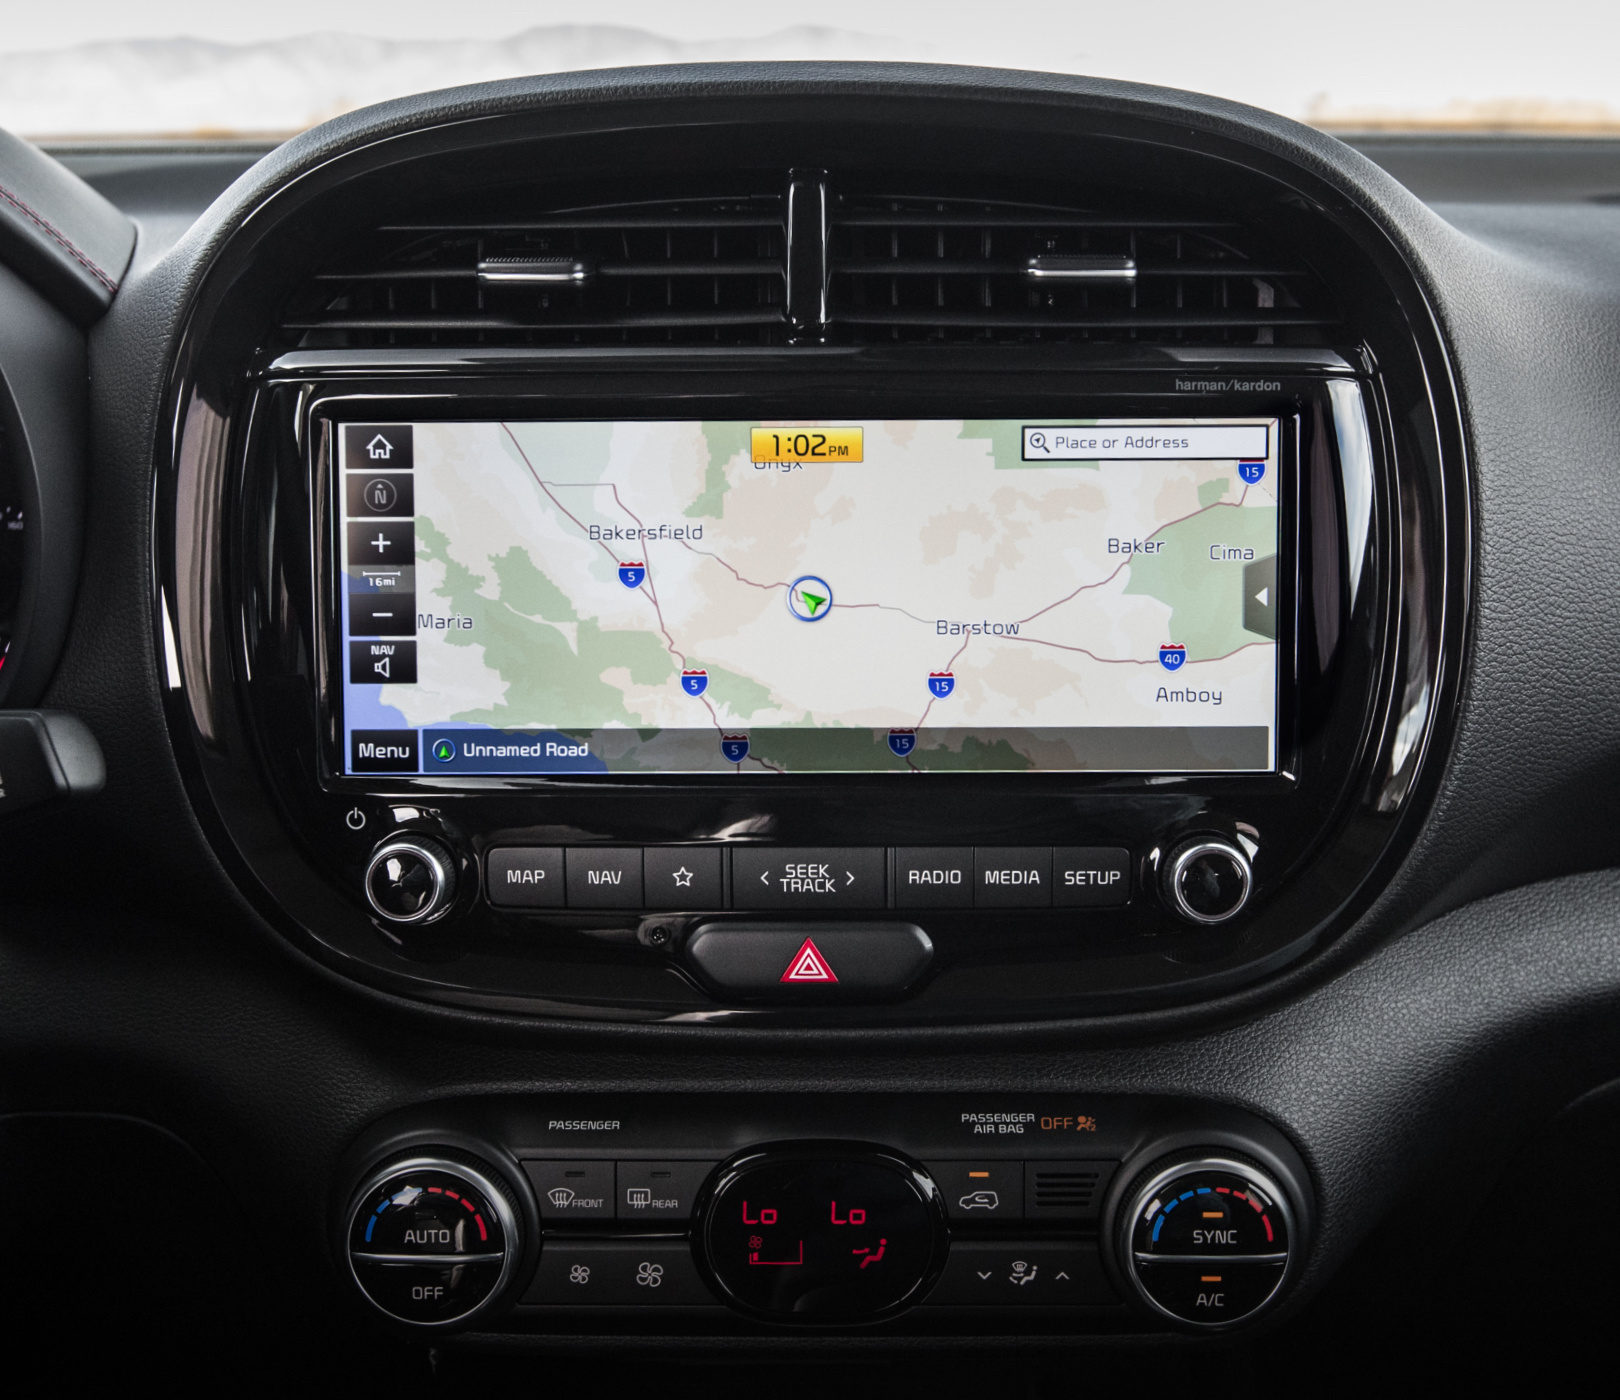 2022 Kia Soul Interior 10.25-Inch Touchscreen With Navigation